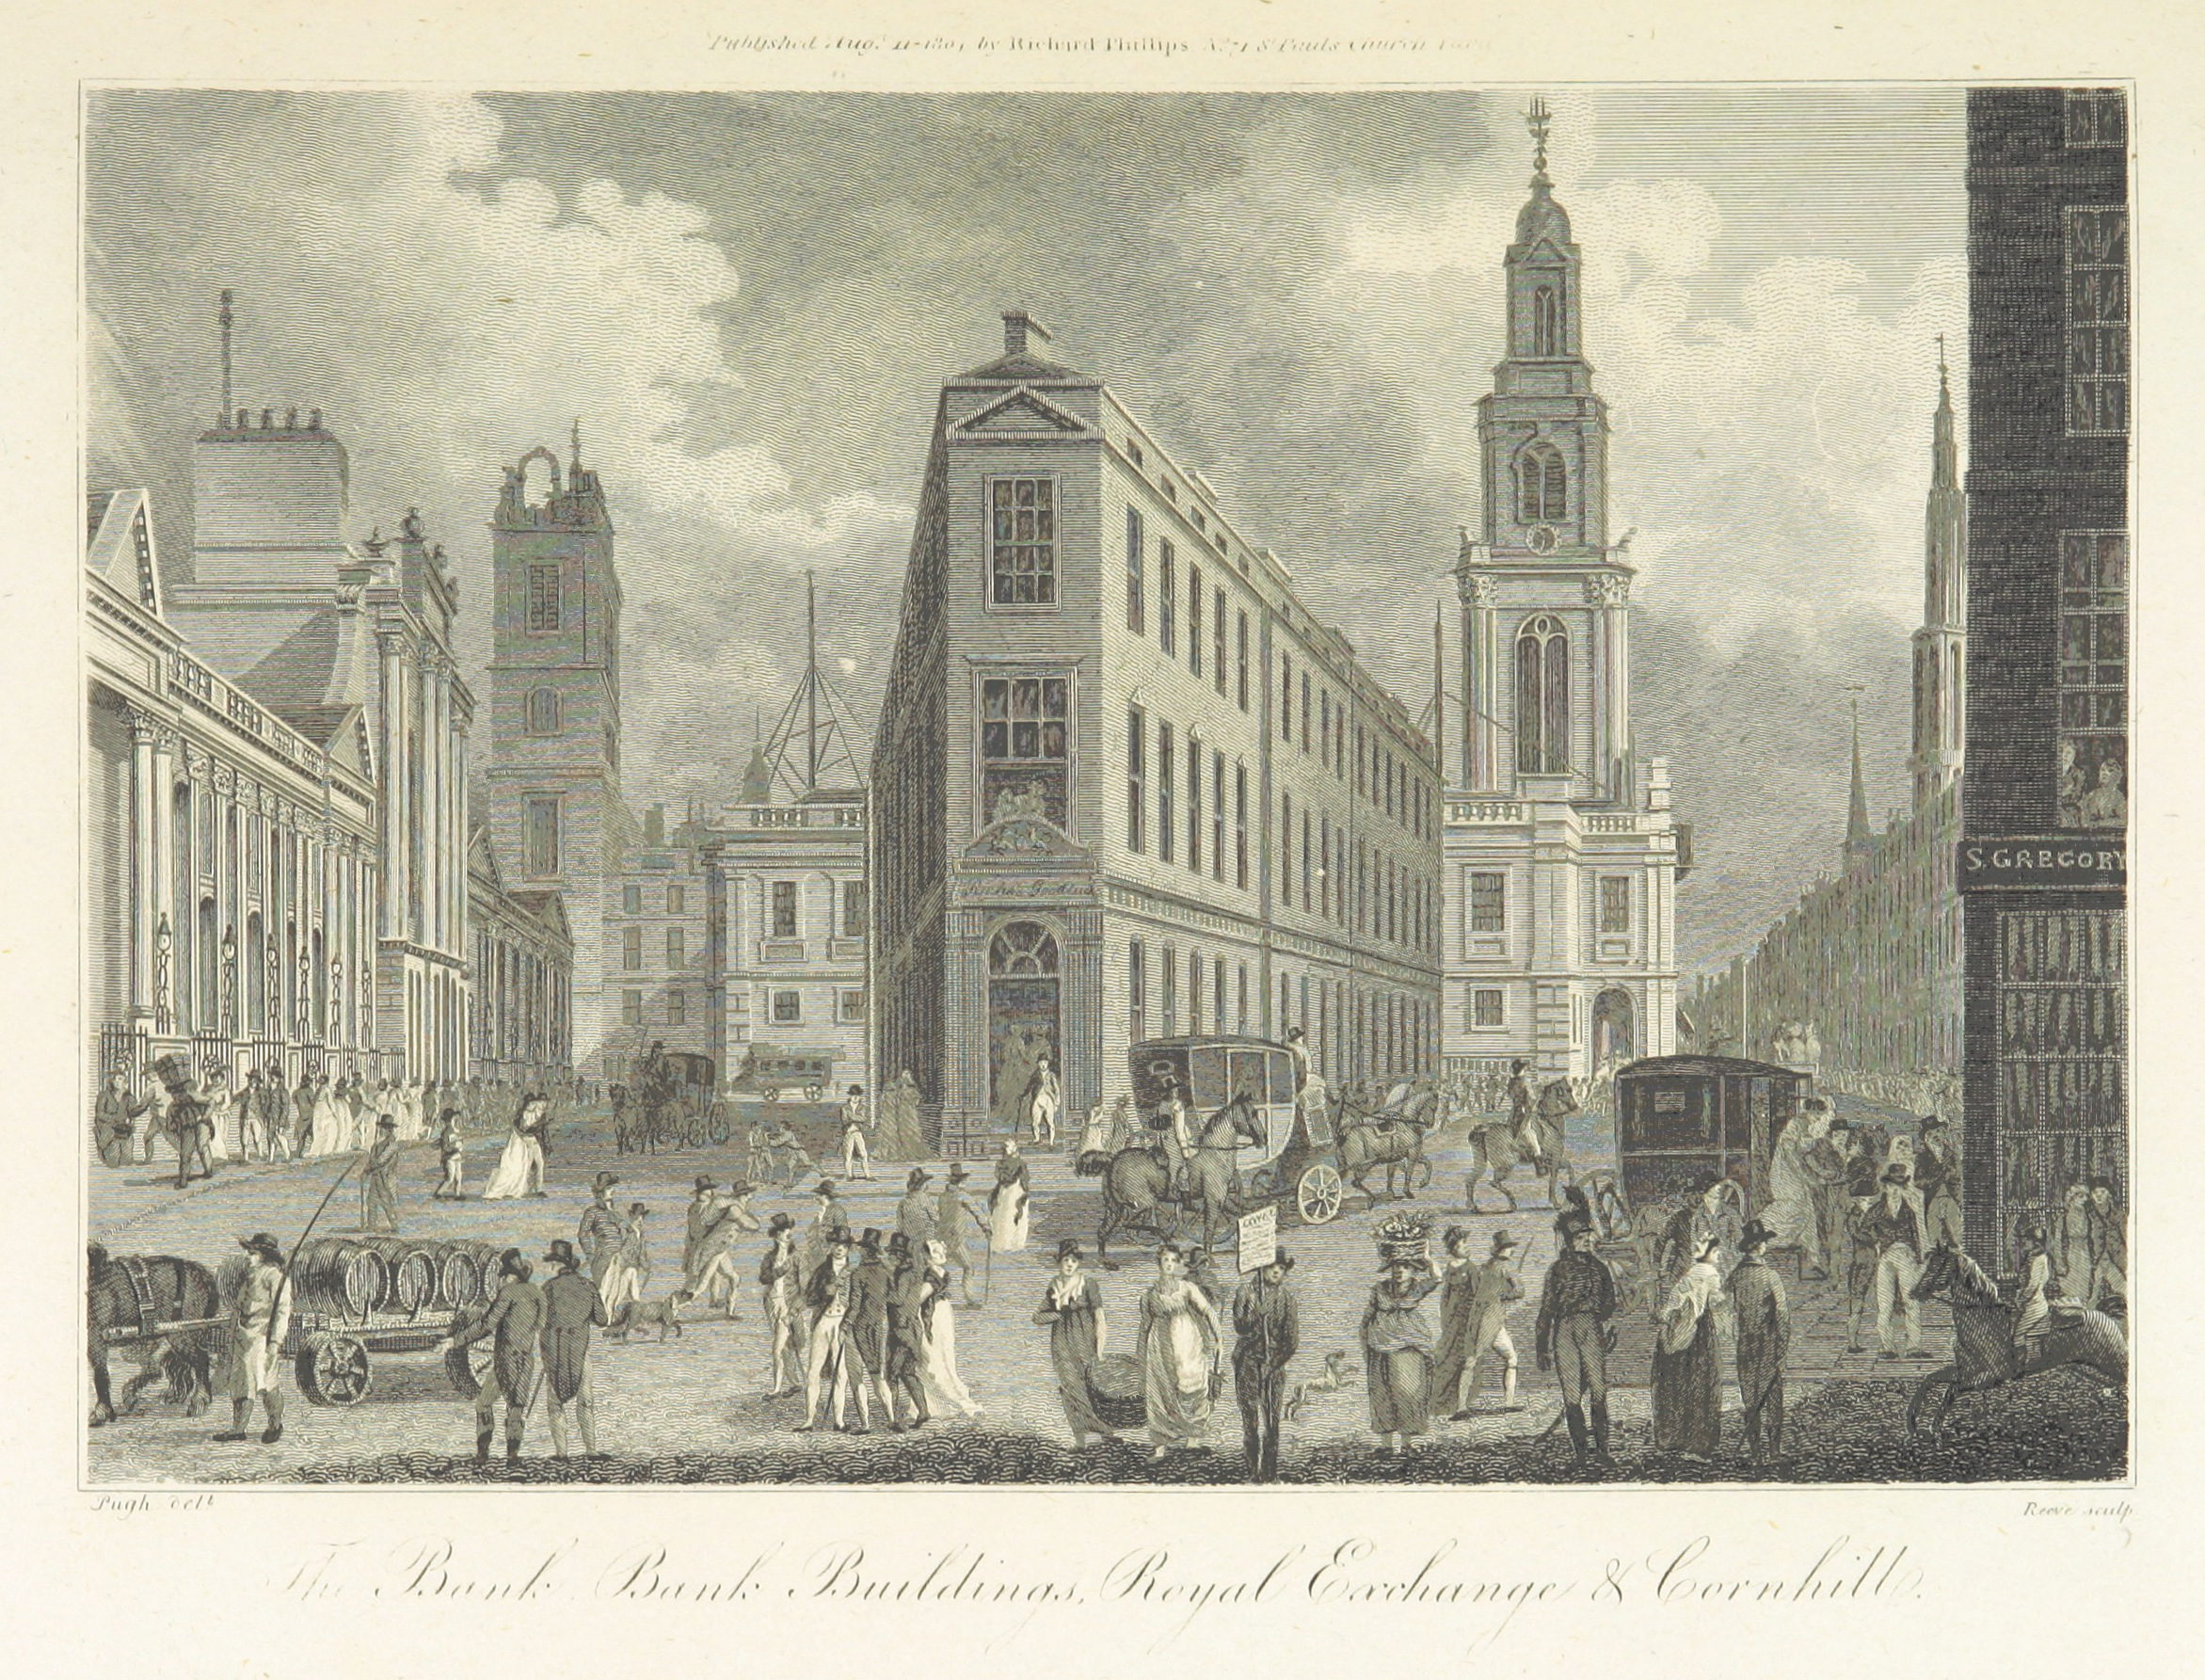 Phillips(1804)_p333_-_The_Bank,_Bank_Buildings,_Royal_Exchange_and_Cornhill